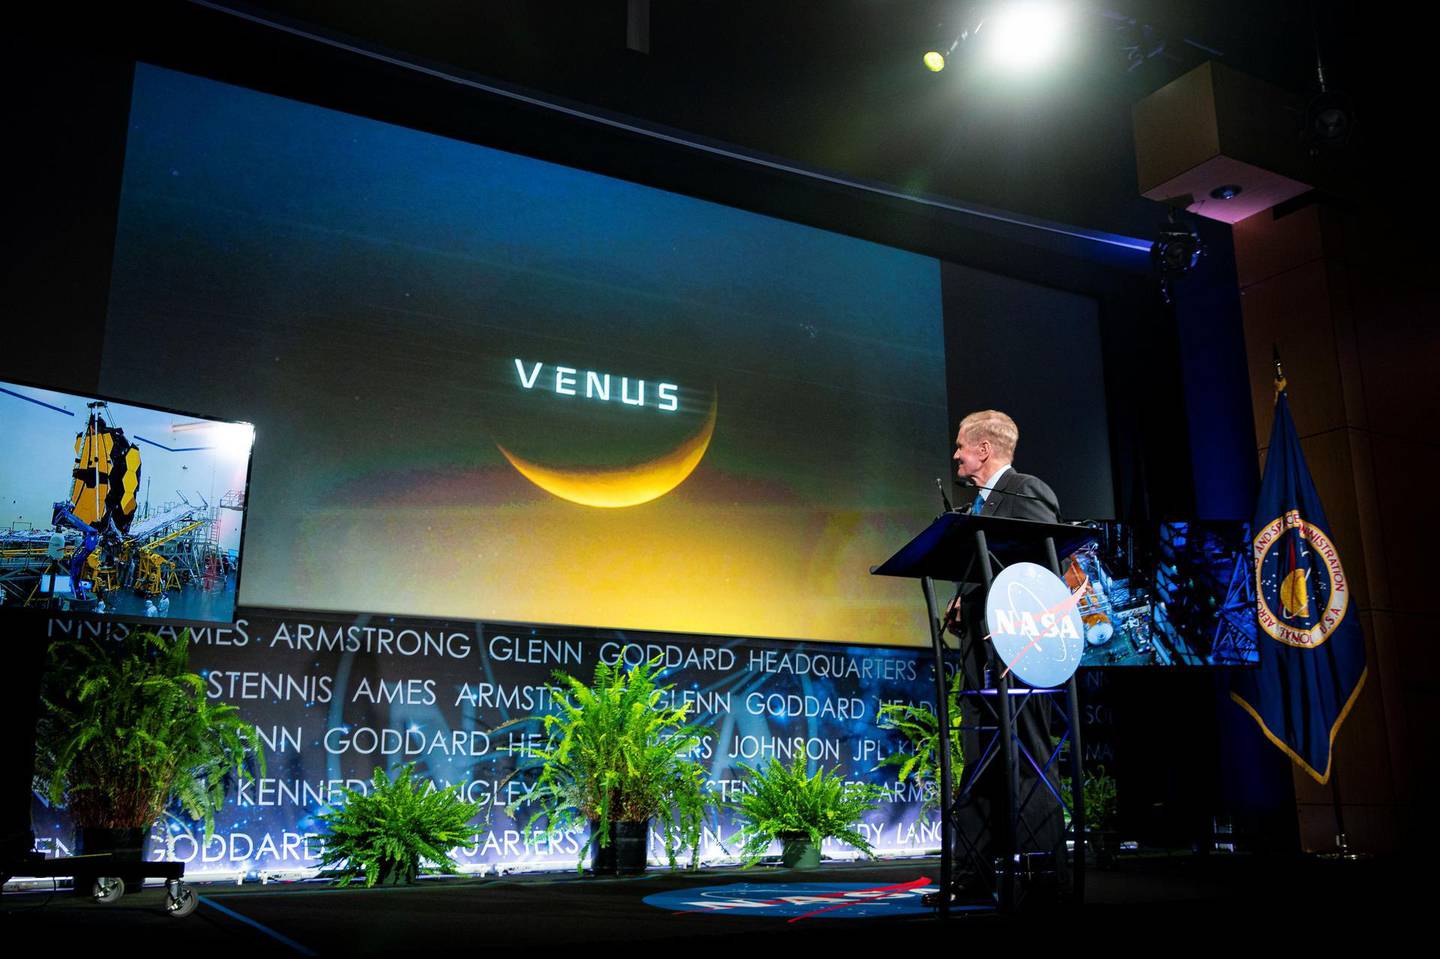 NASA Administrator Bill Nelson looks at a monitor during a "State of NASA" address, as he announces the new DAVINCI+ and VERITAS space missions to study Venus, at NASA headquarters in Washington, U.S., June 2, 2021. REUTERS/Al Drago